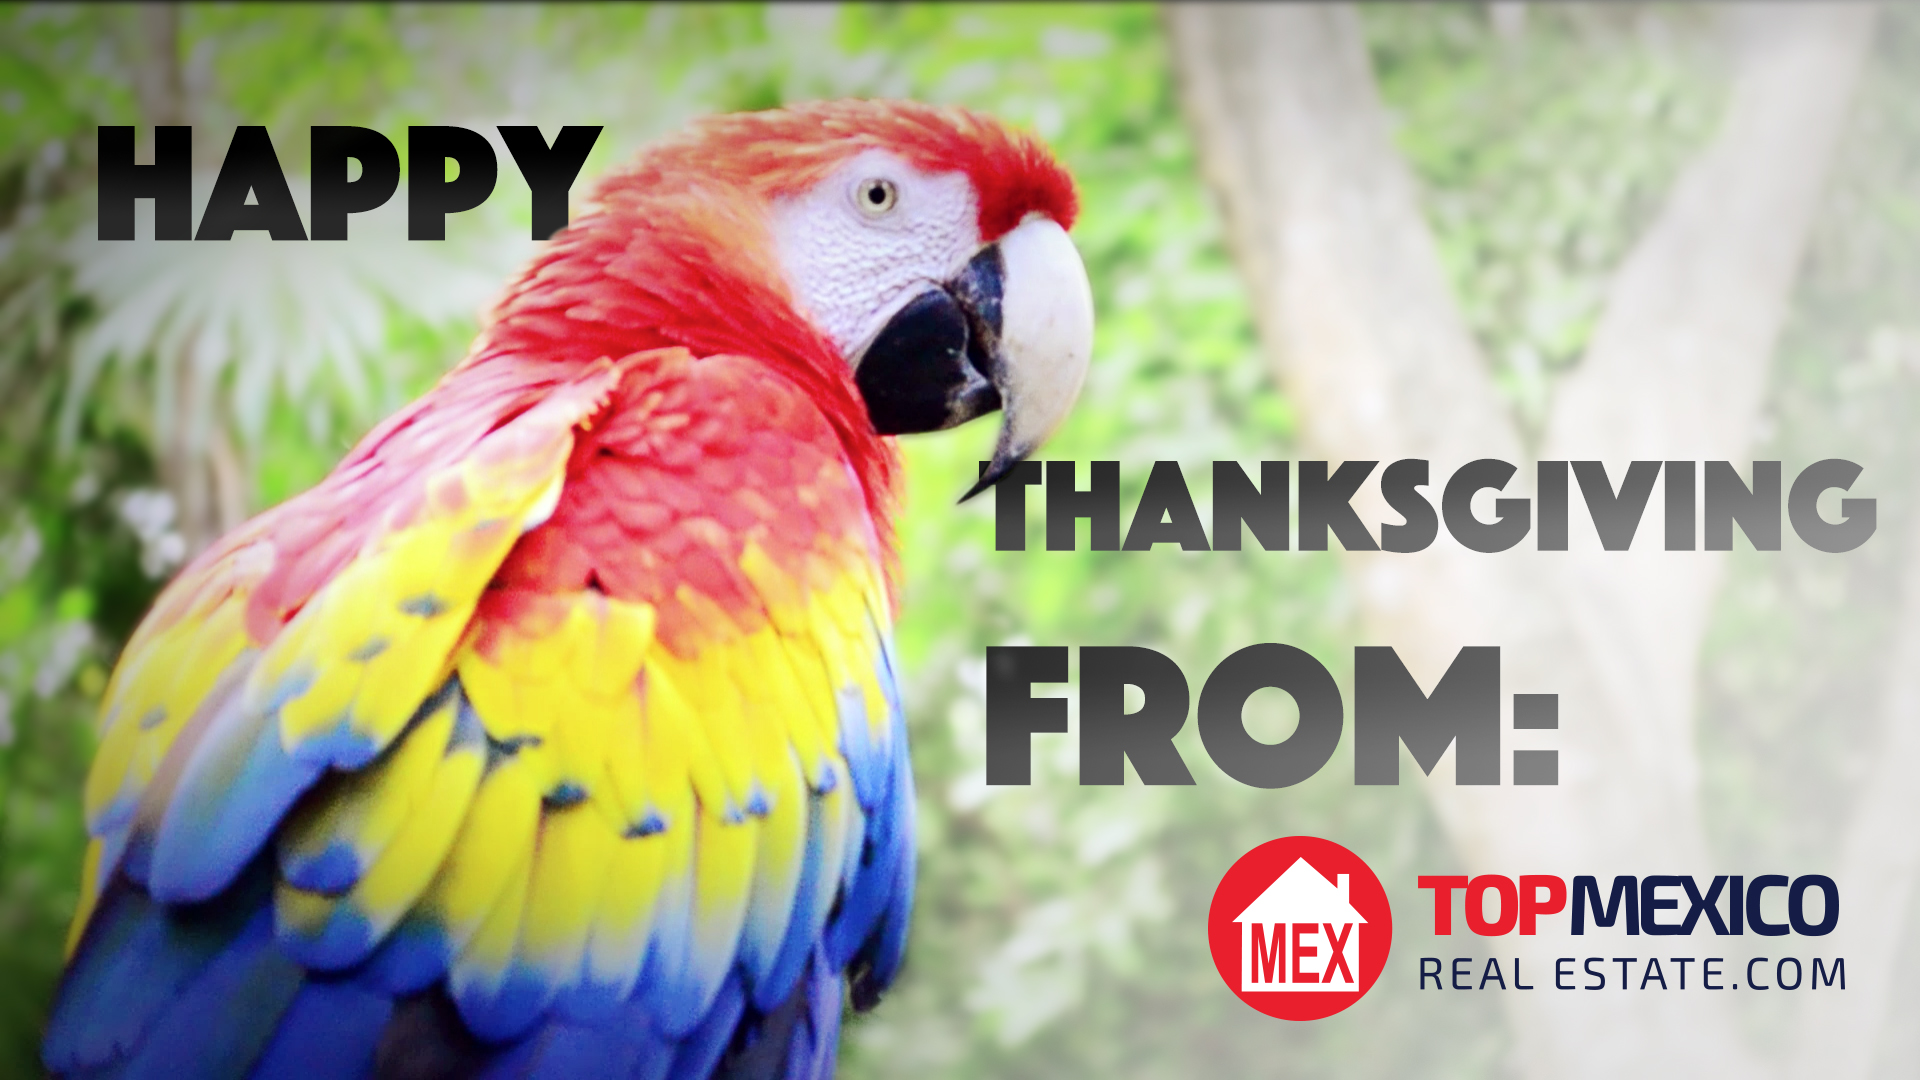 Thanksgiving Message 2014   TOPMexicoRealEstate com